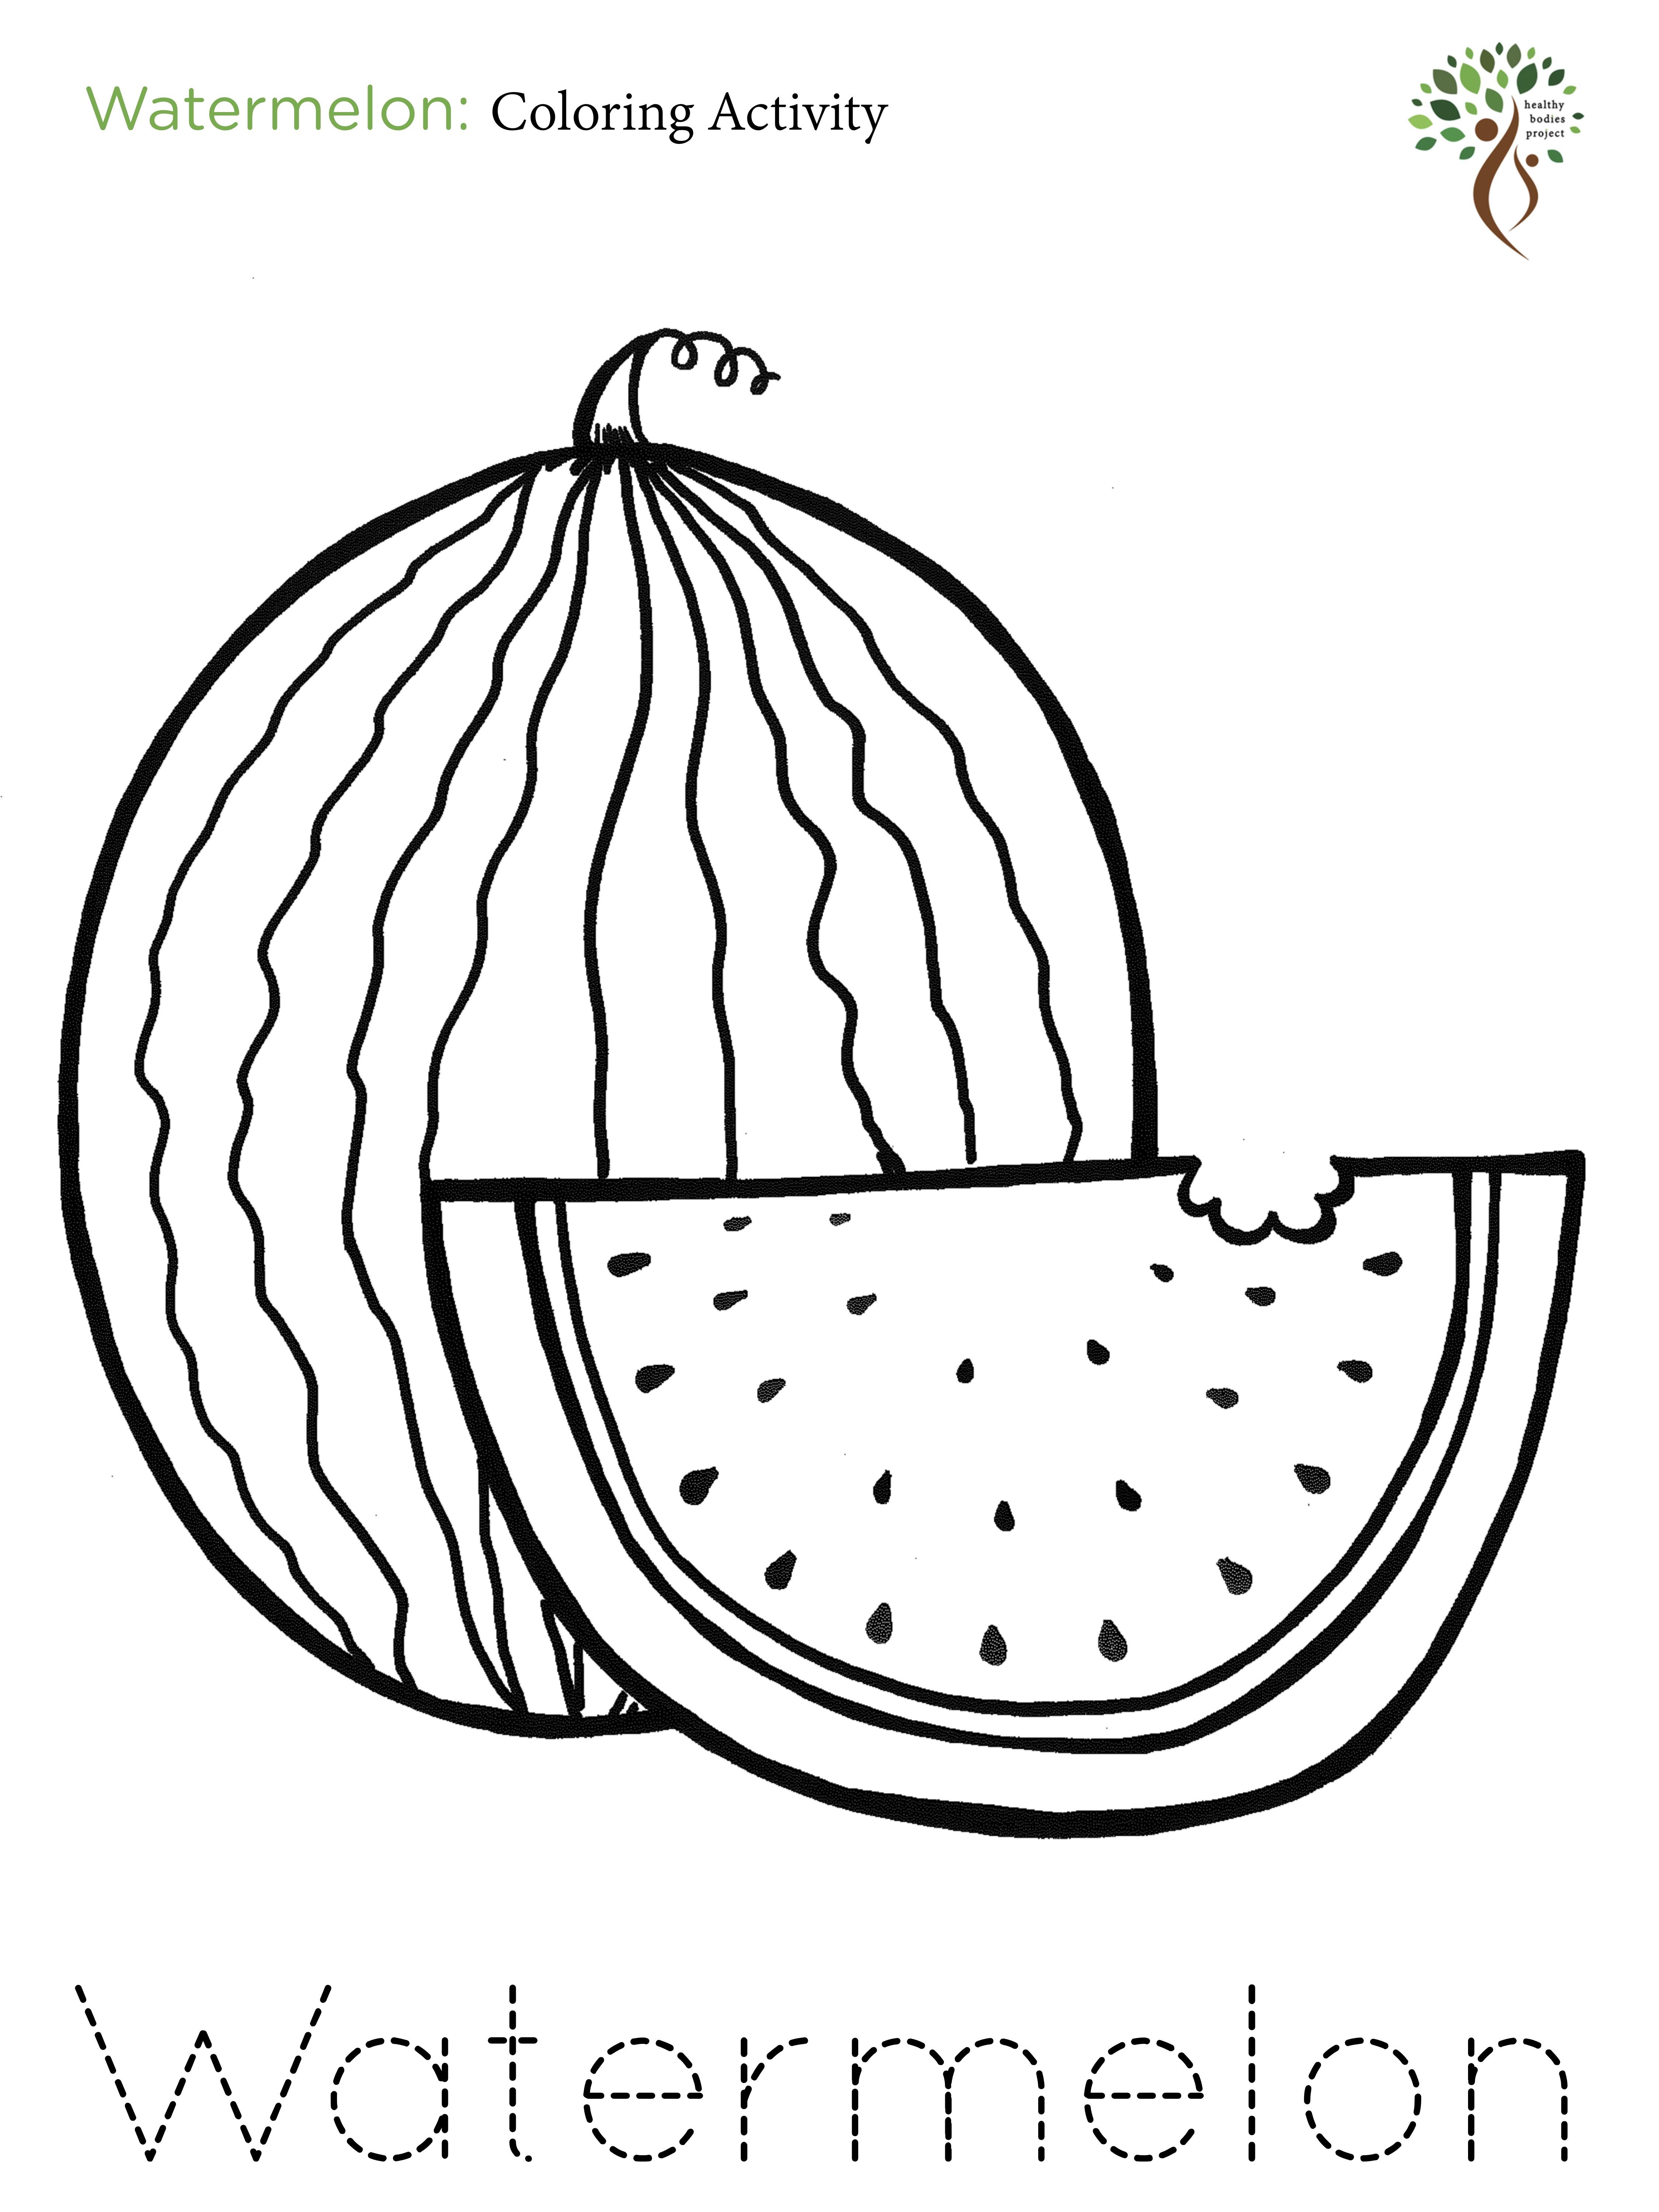 Download Whole Watermelon Page Coloring Pages